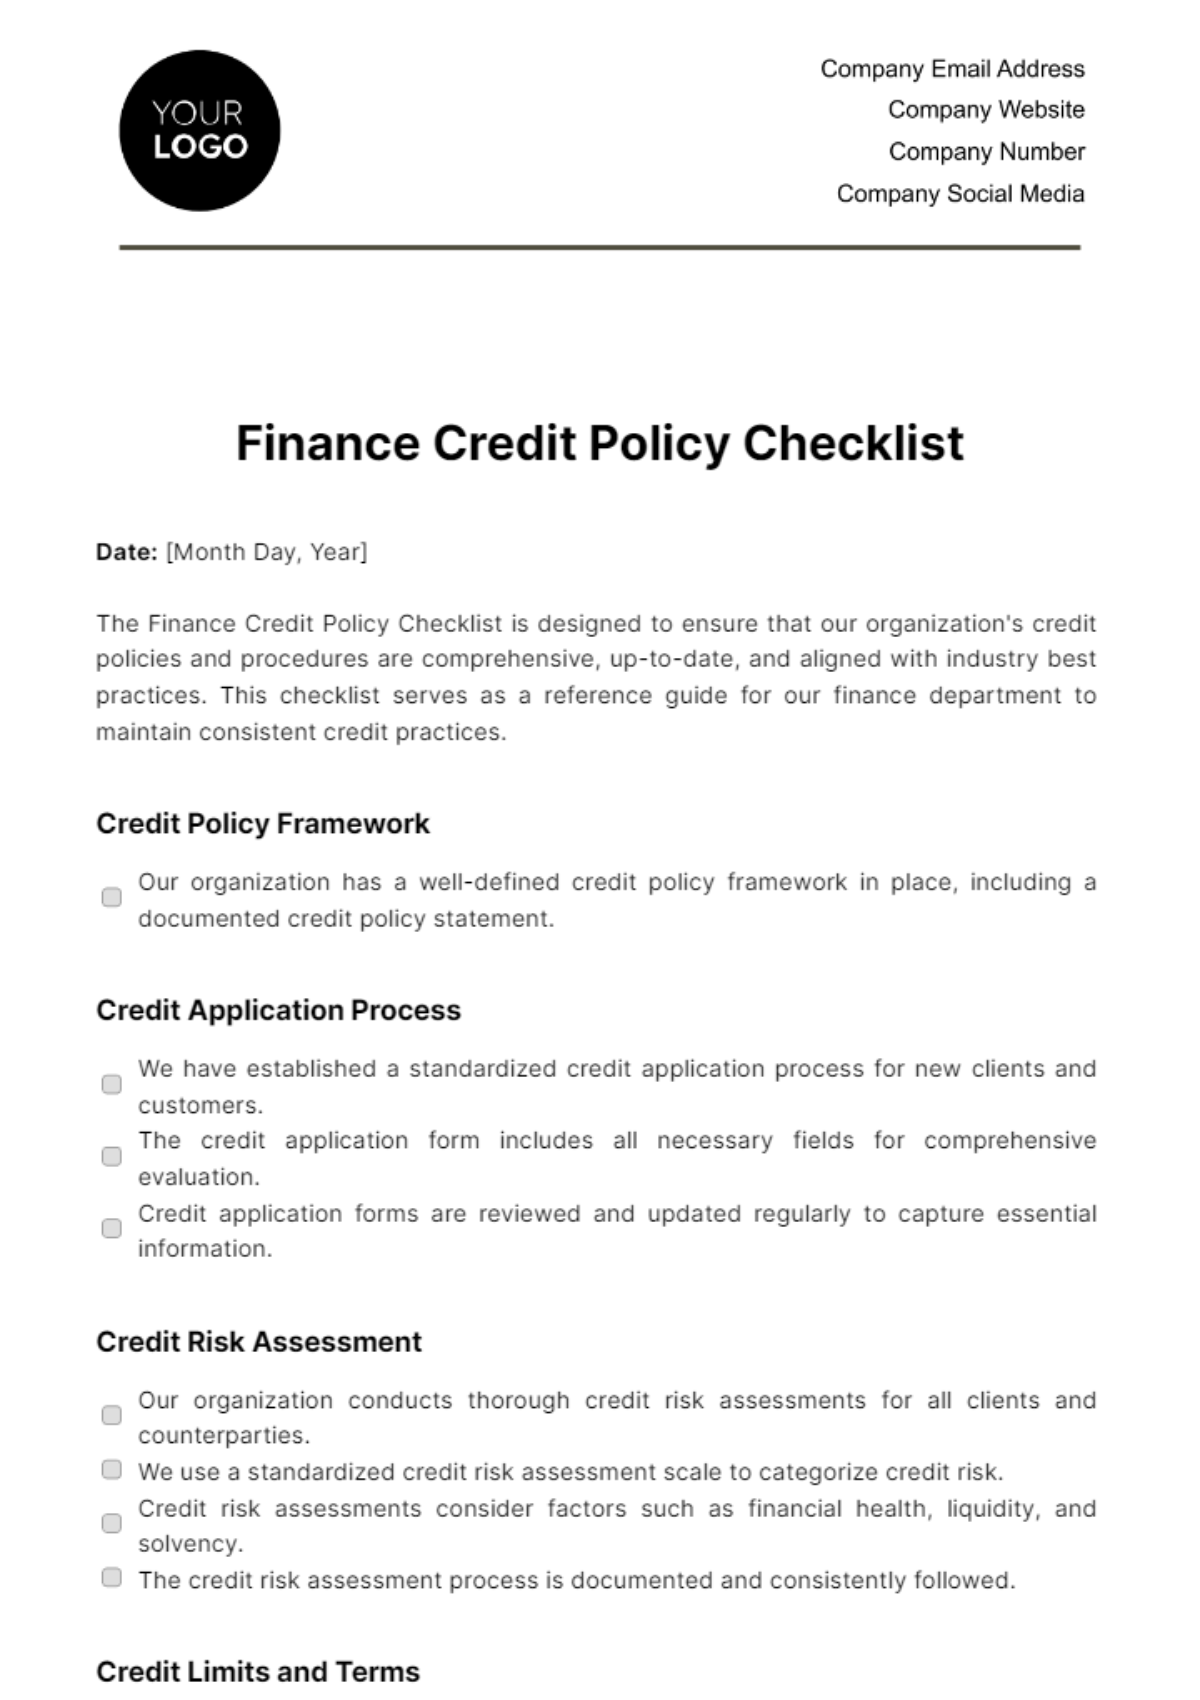 Free Finance Credit Policy Checklist Template